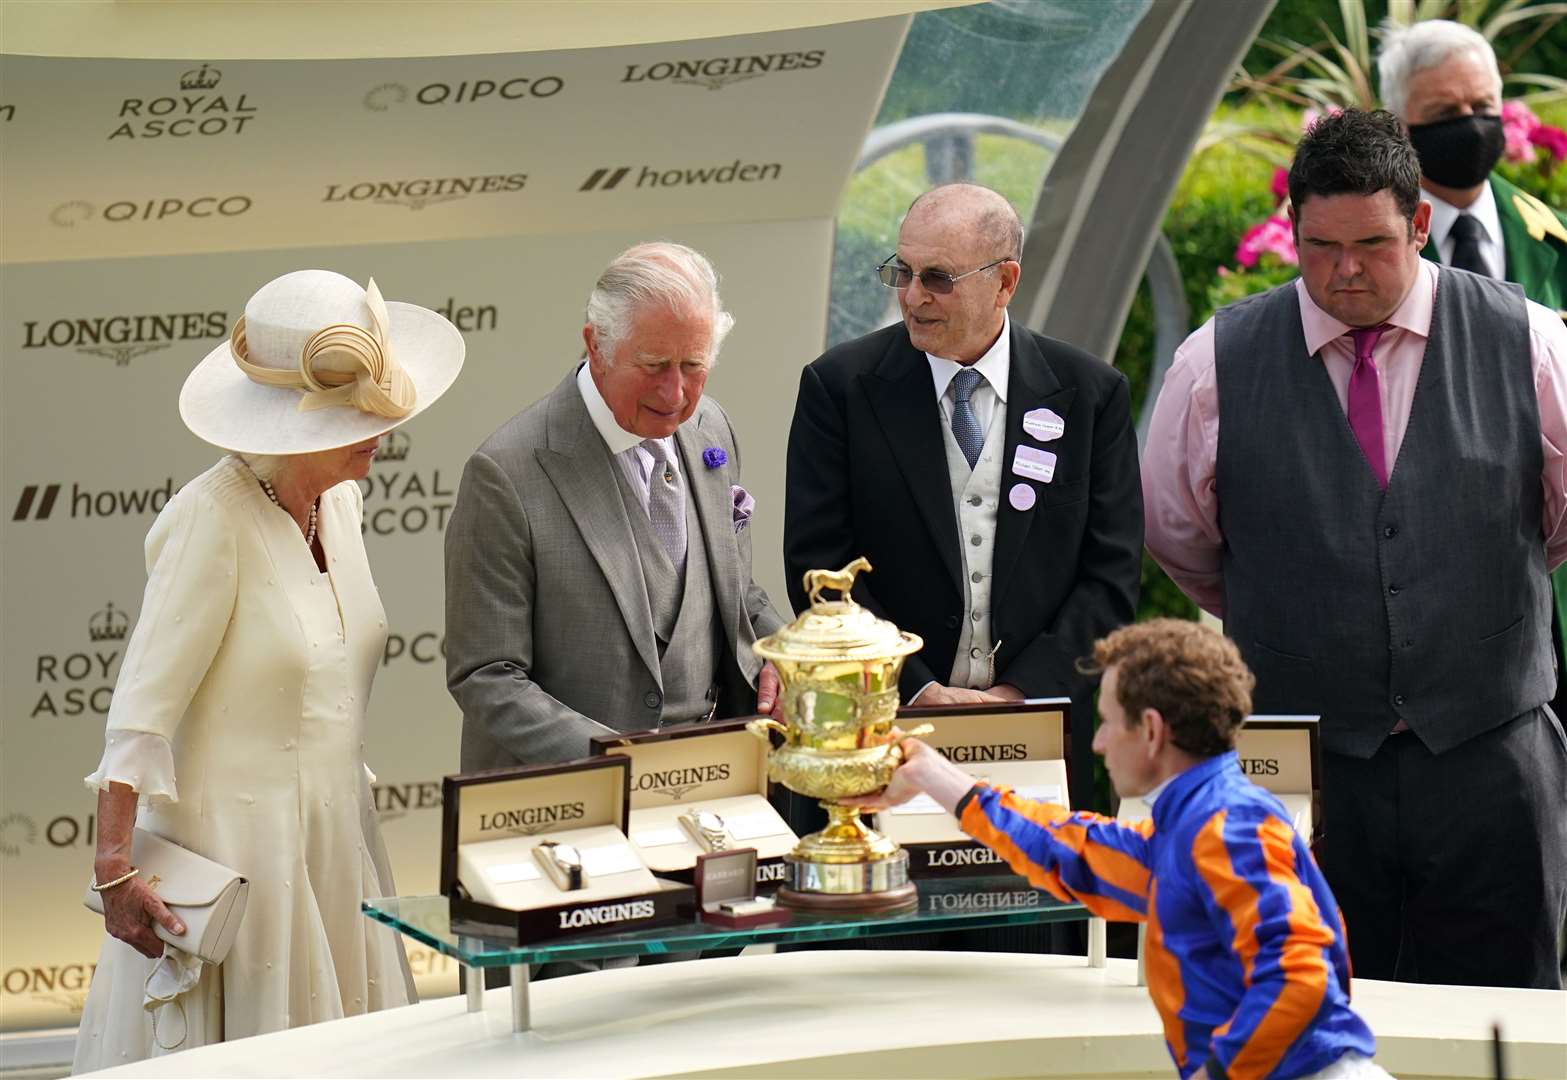 Jockey Ryan Moore collects the trophy from the Prince of Wales and the Duchess of Cornwall after winning the Prince Of Wales’s Stakes on Love (Andrew Matthews/PA)